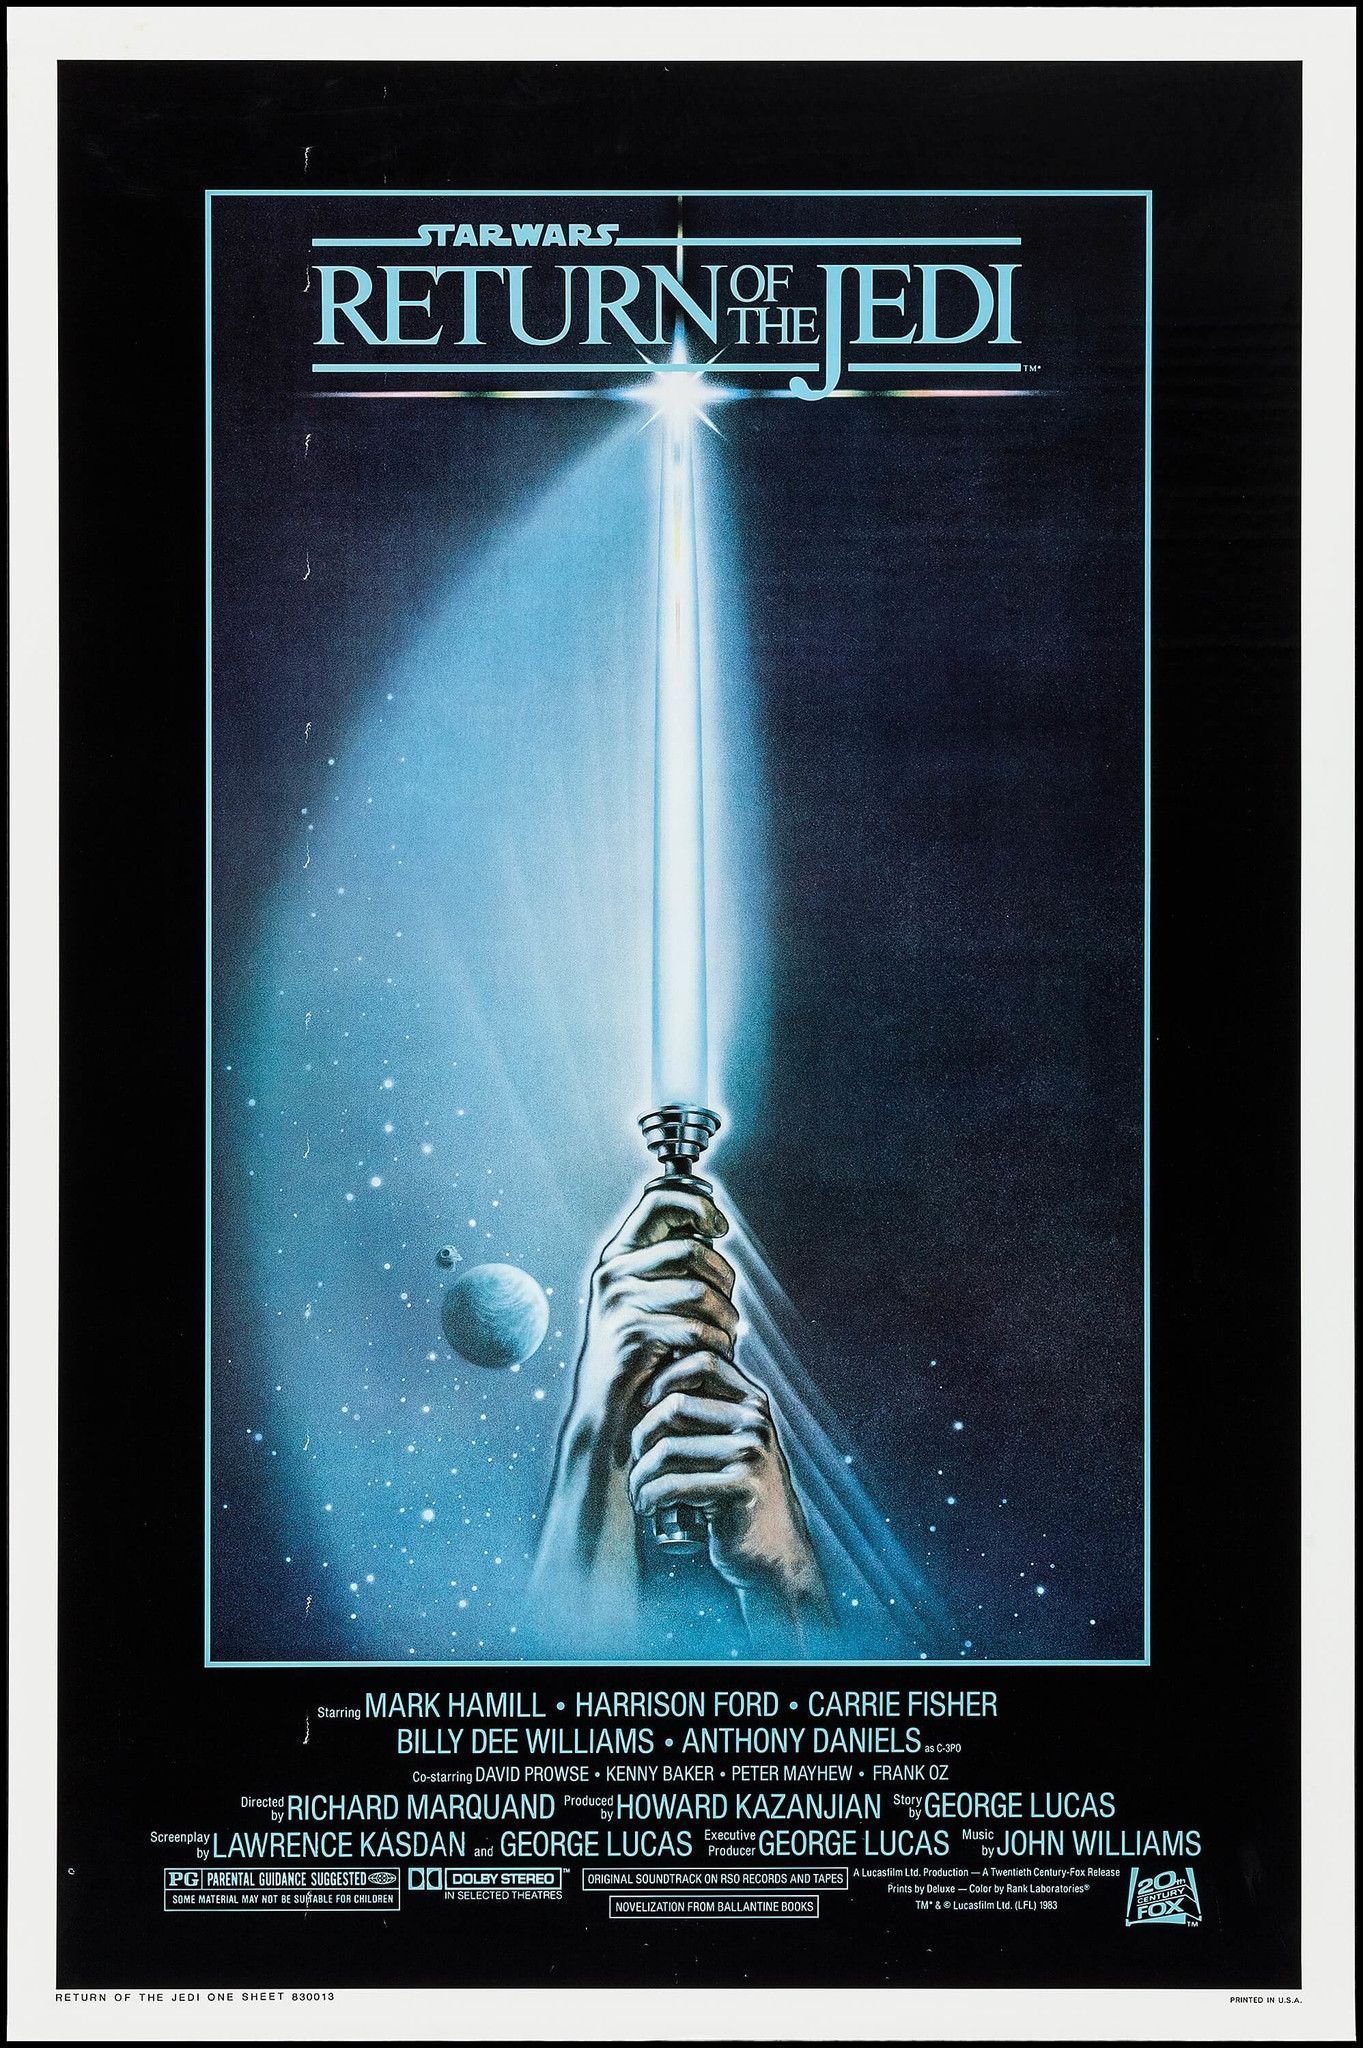 The 10 Best Star Wars Posters Ranked